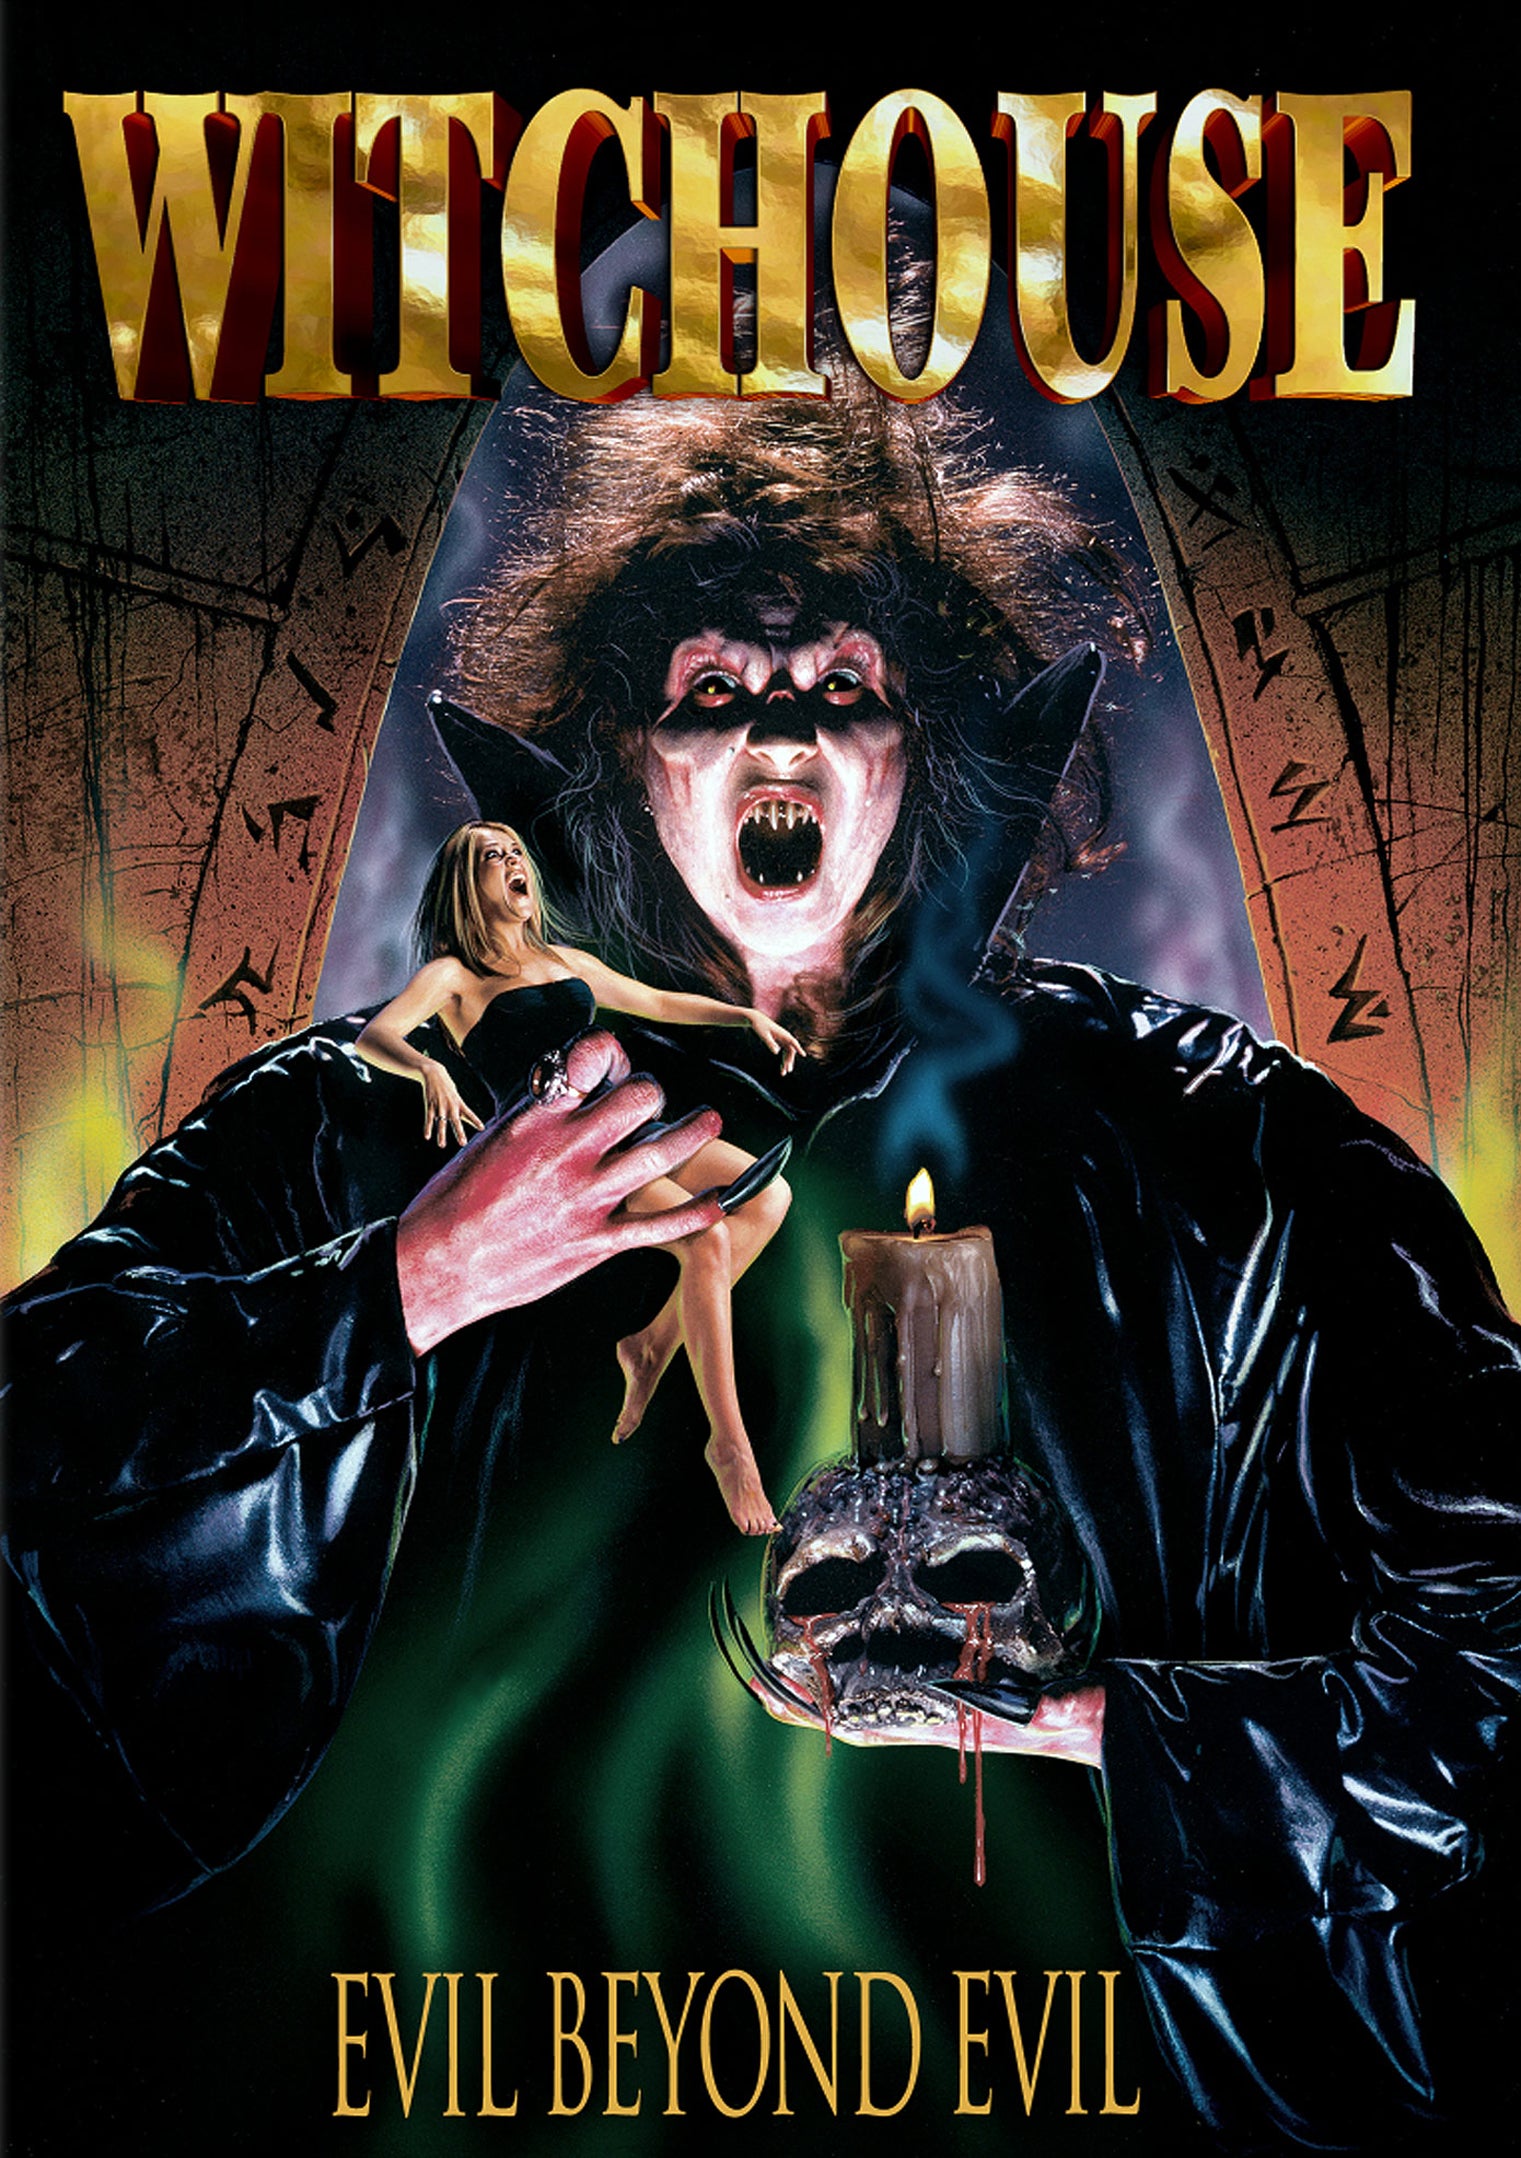 WITCHOUSE DVD